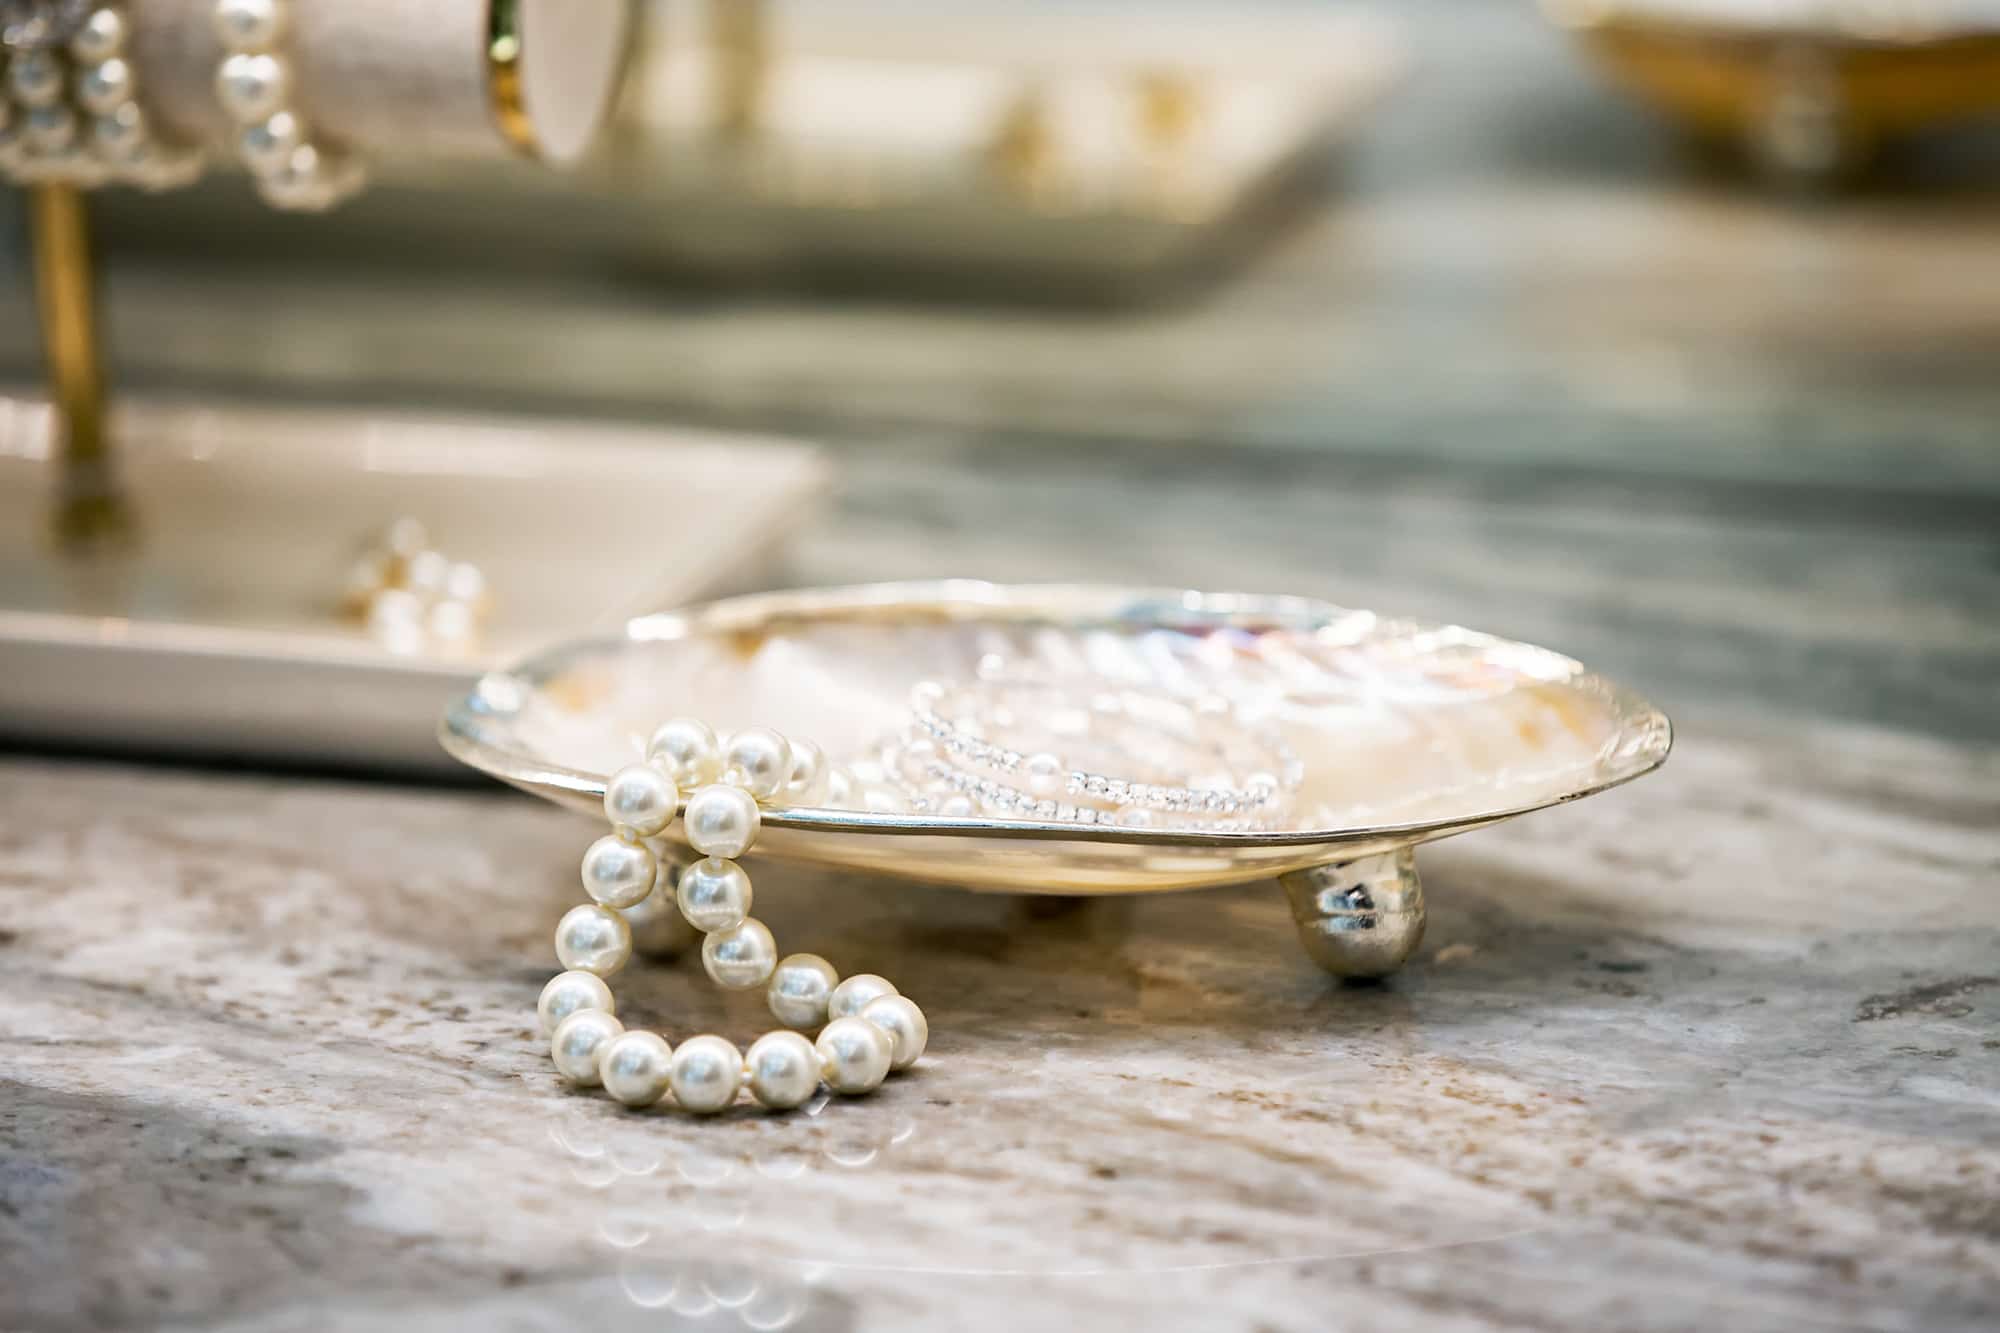 Close up of jewelry in small plate